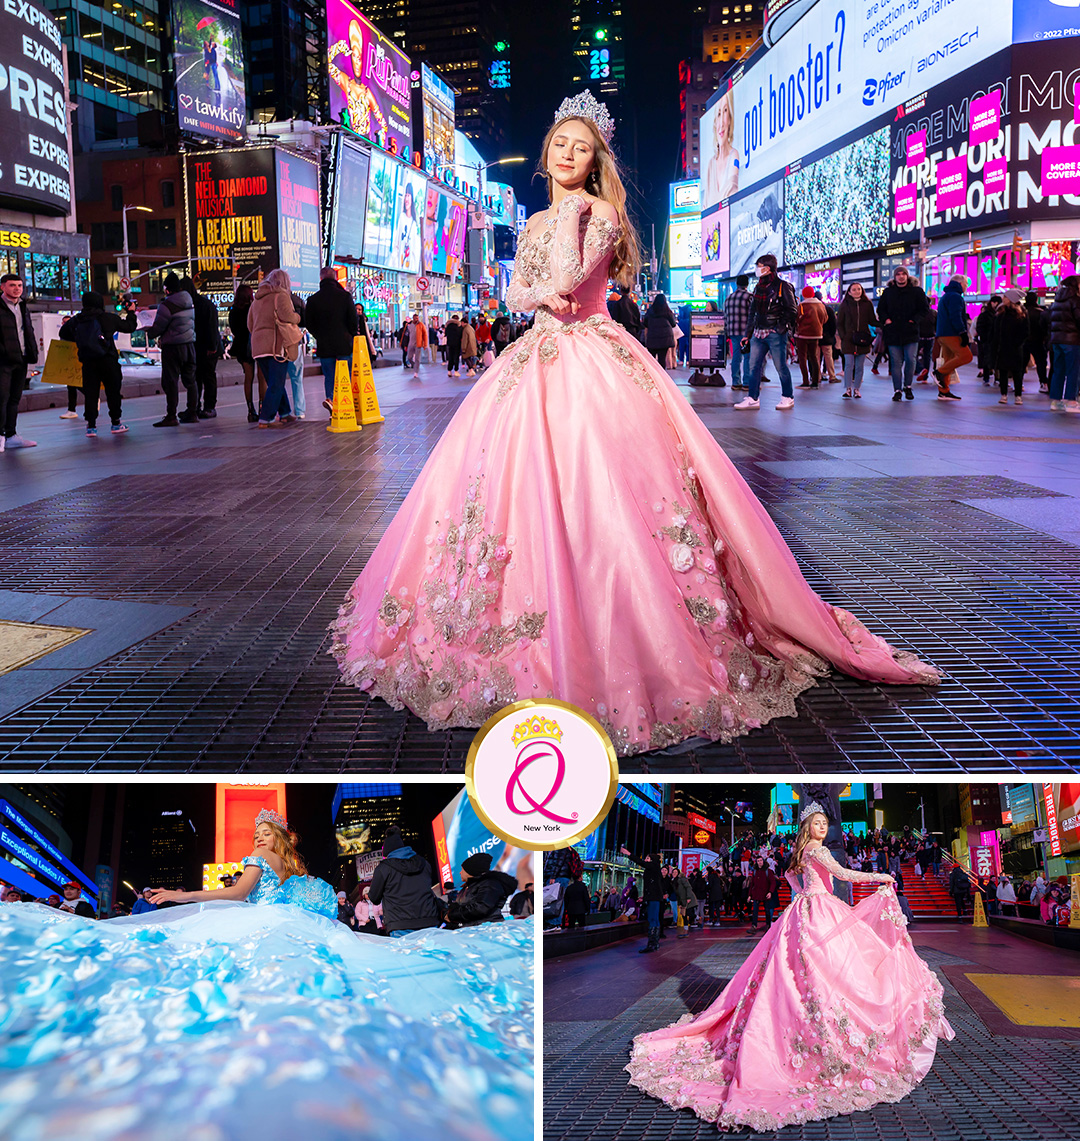 Crystal -Sweet16 Quinceanera photo and video Time Square, NYC